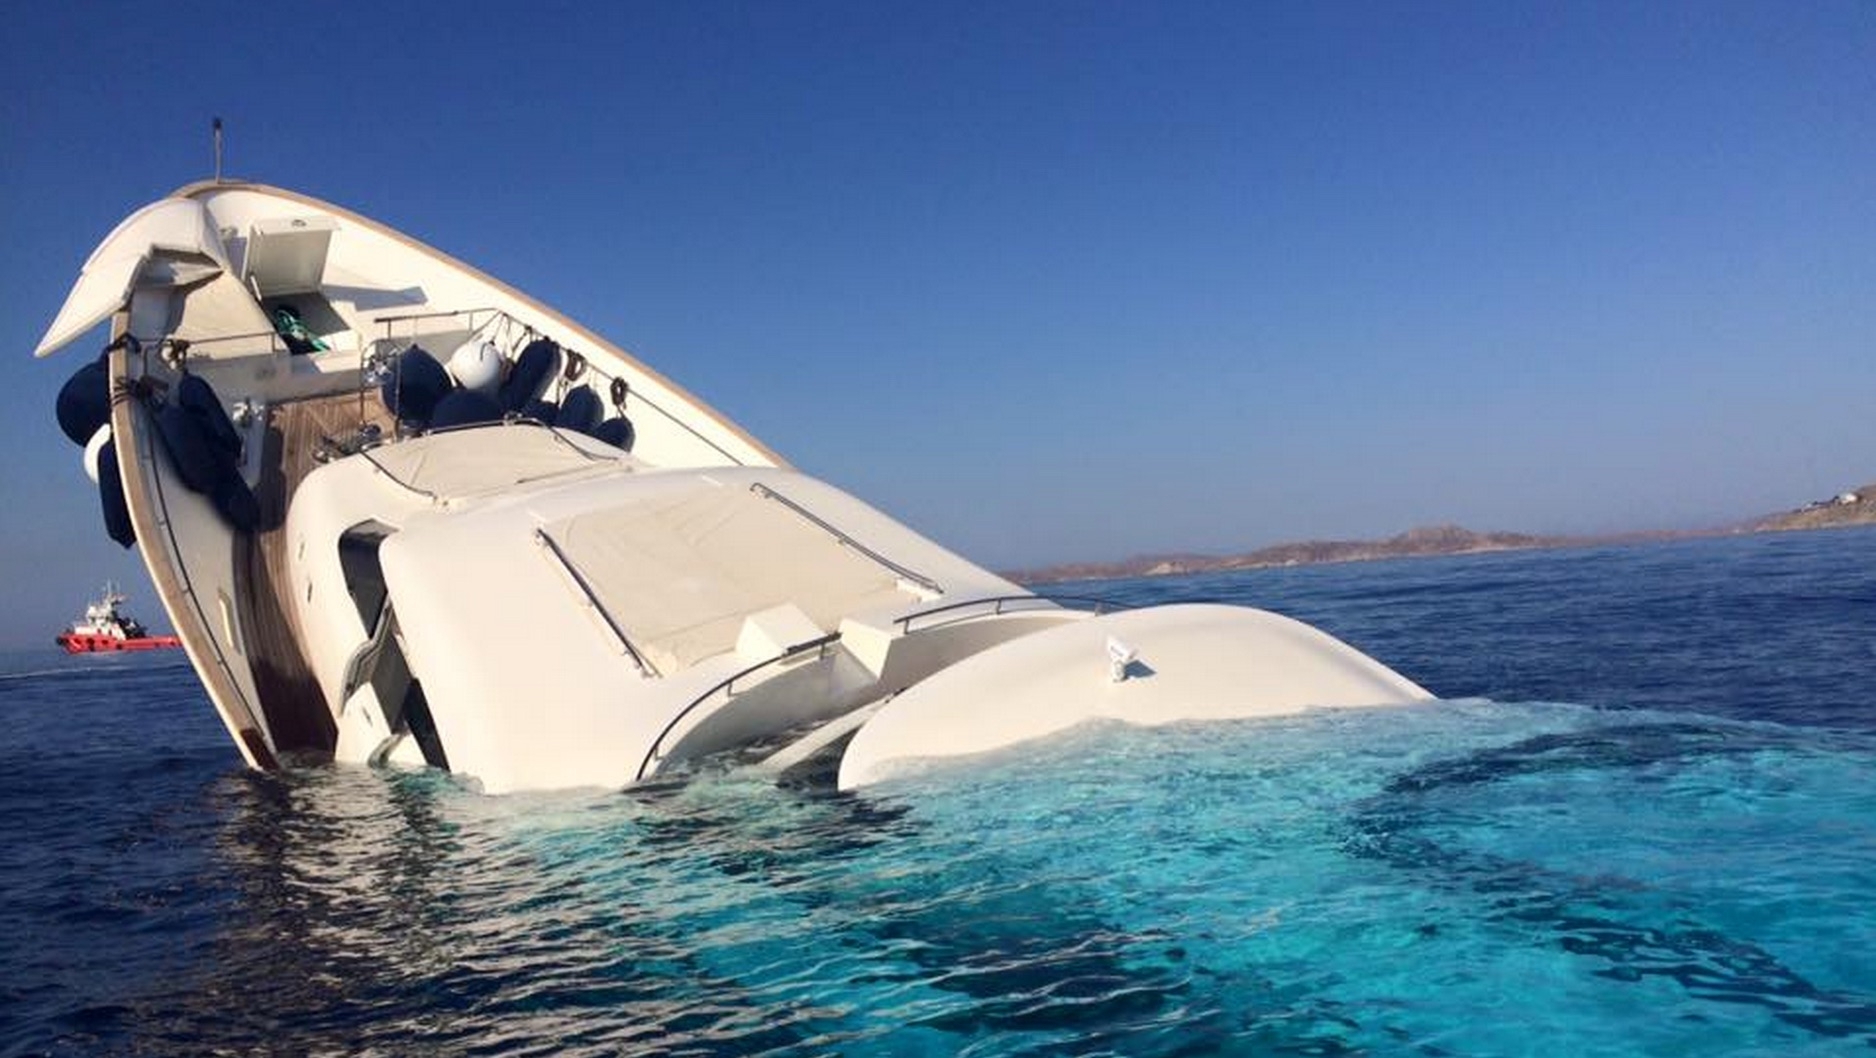 This Is What A $12 Million Yacht Looks Like Sinking!